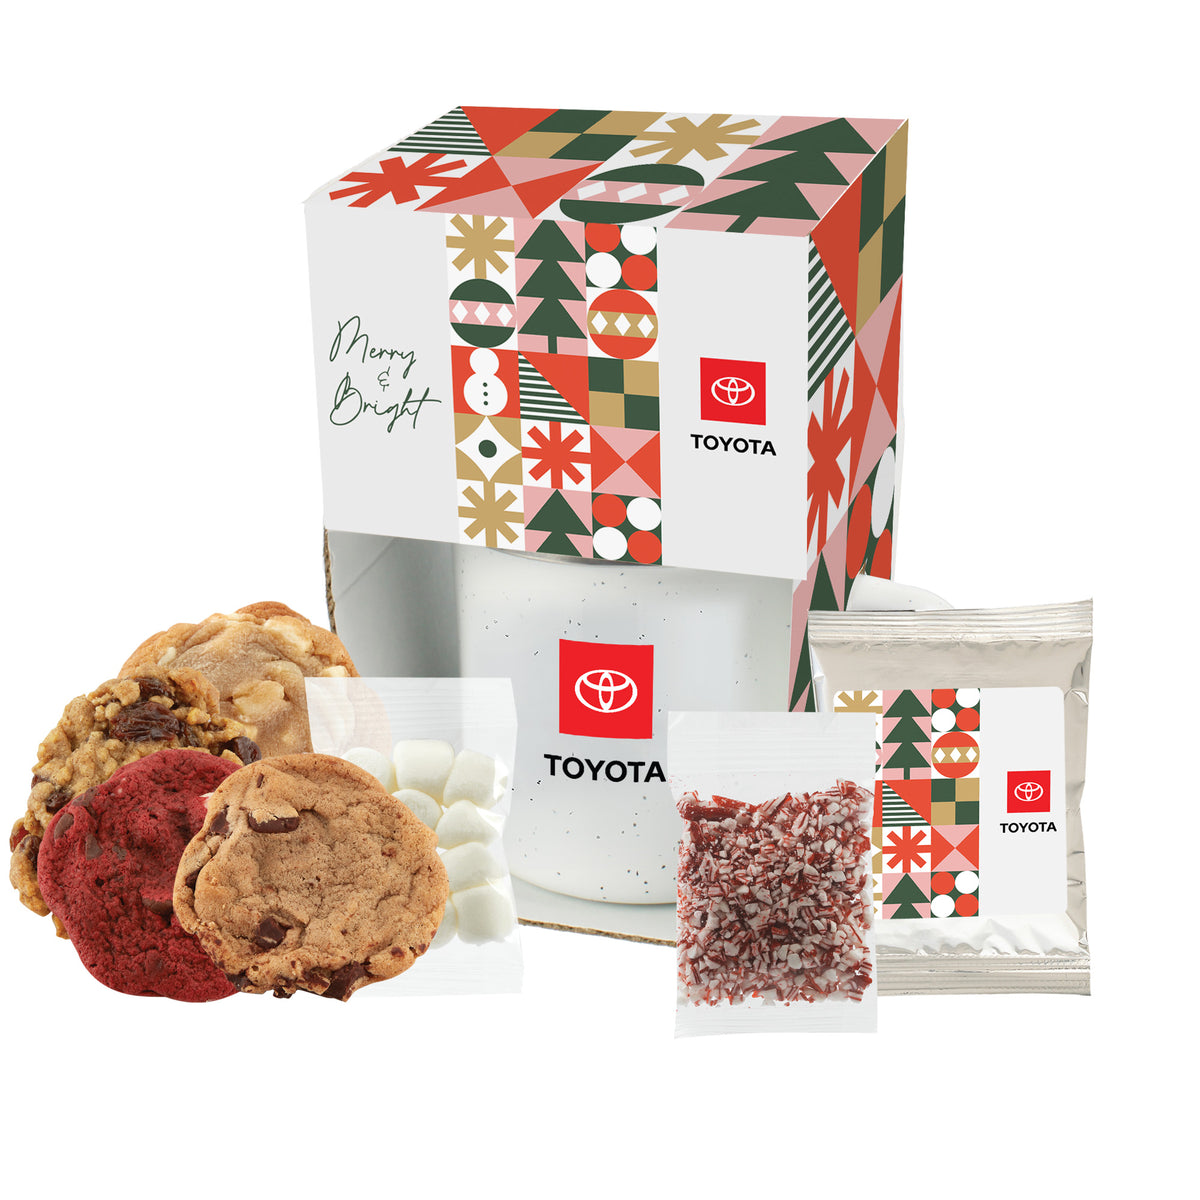 Speckled Camping Mug - 16 oz., Gourmet Cookies (4), Hot Chocolate Holiday Set